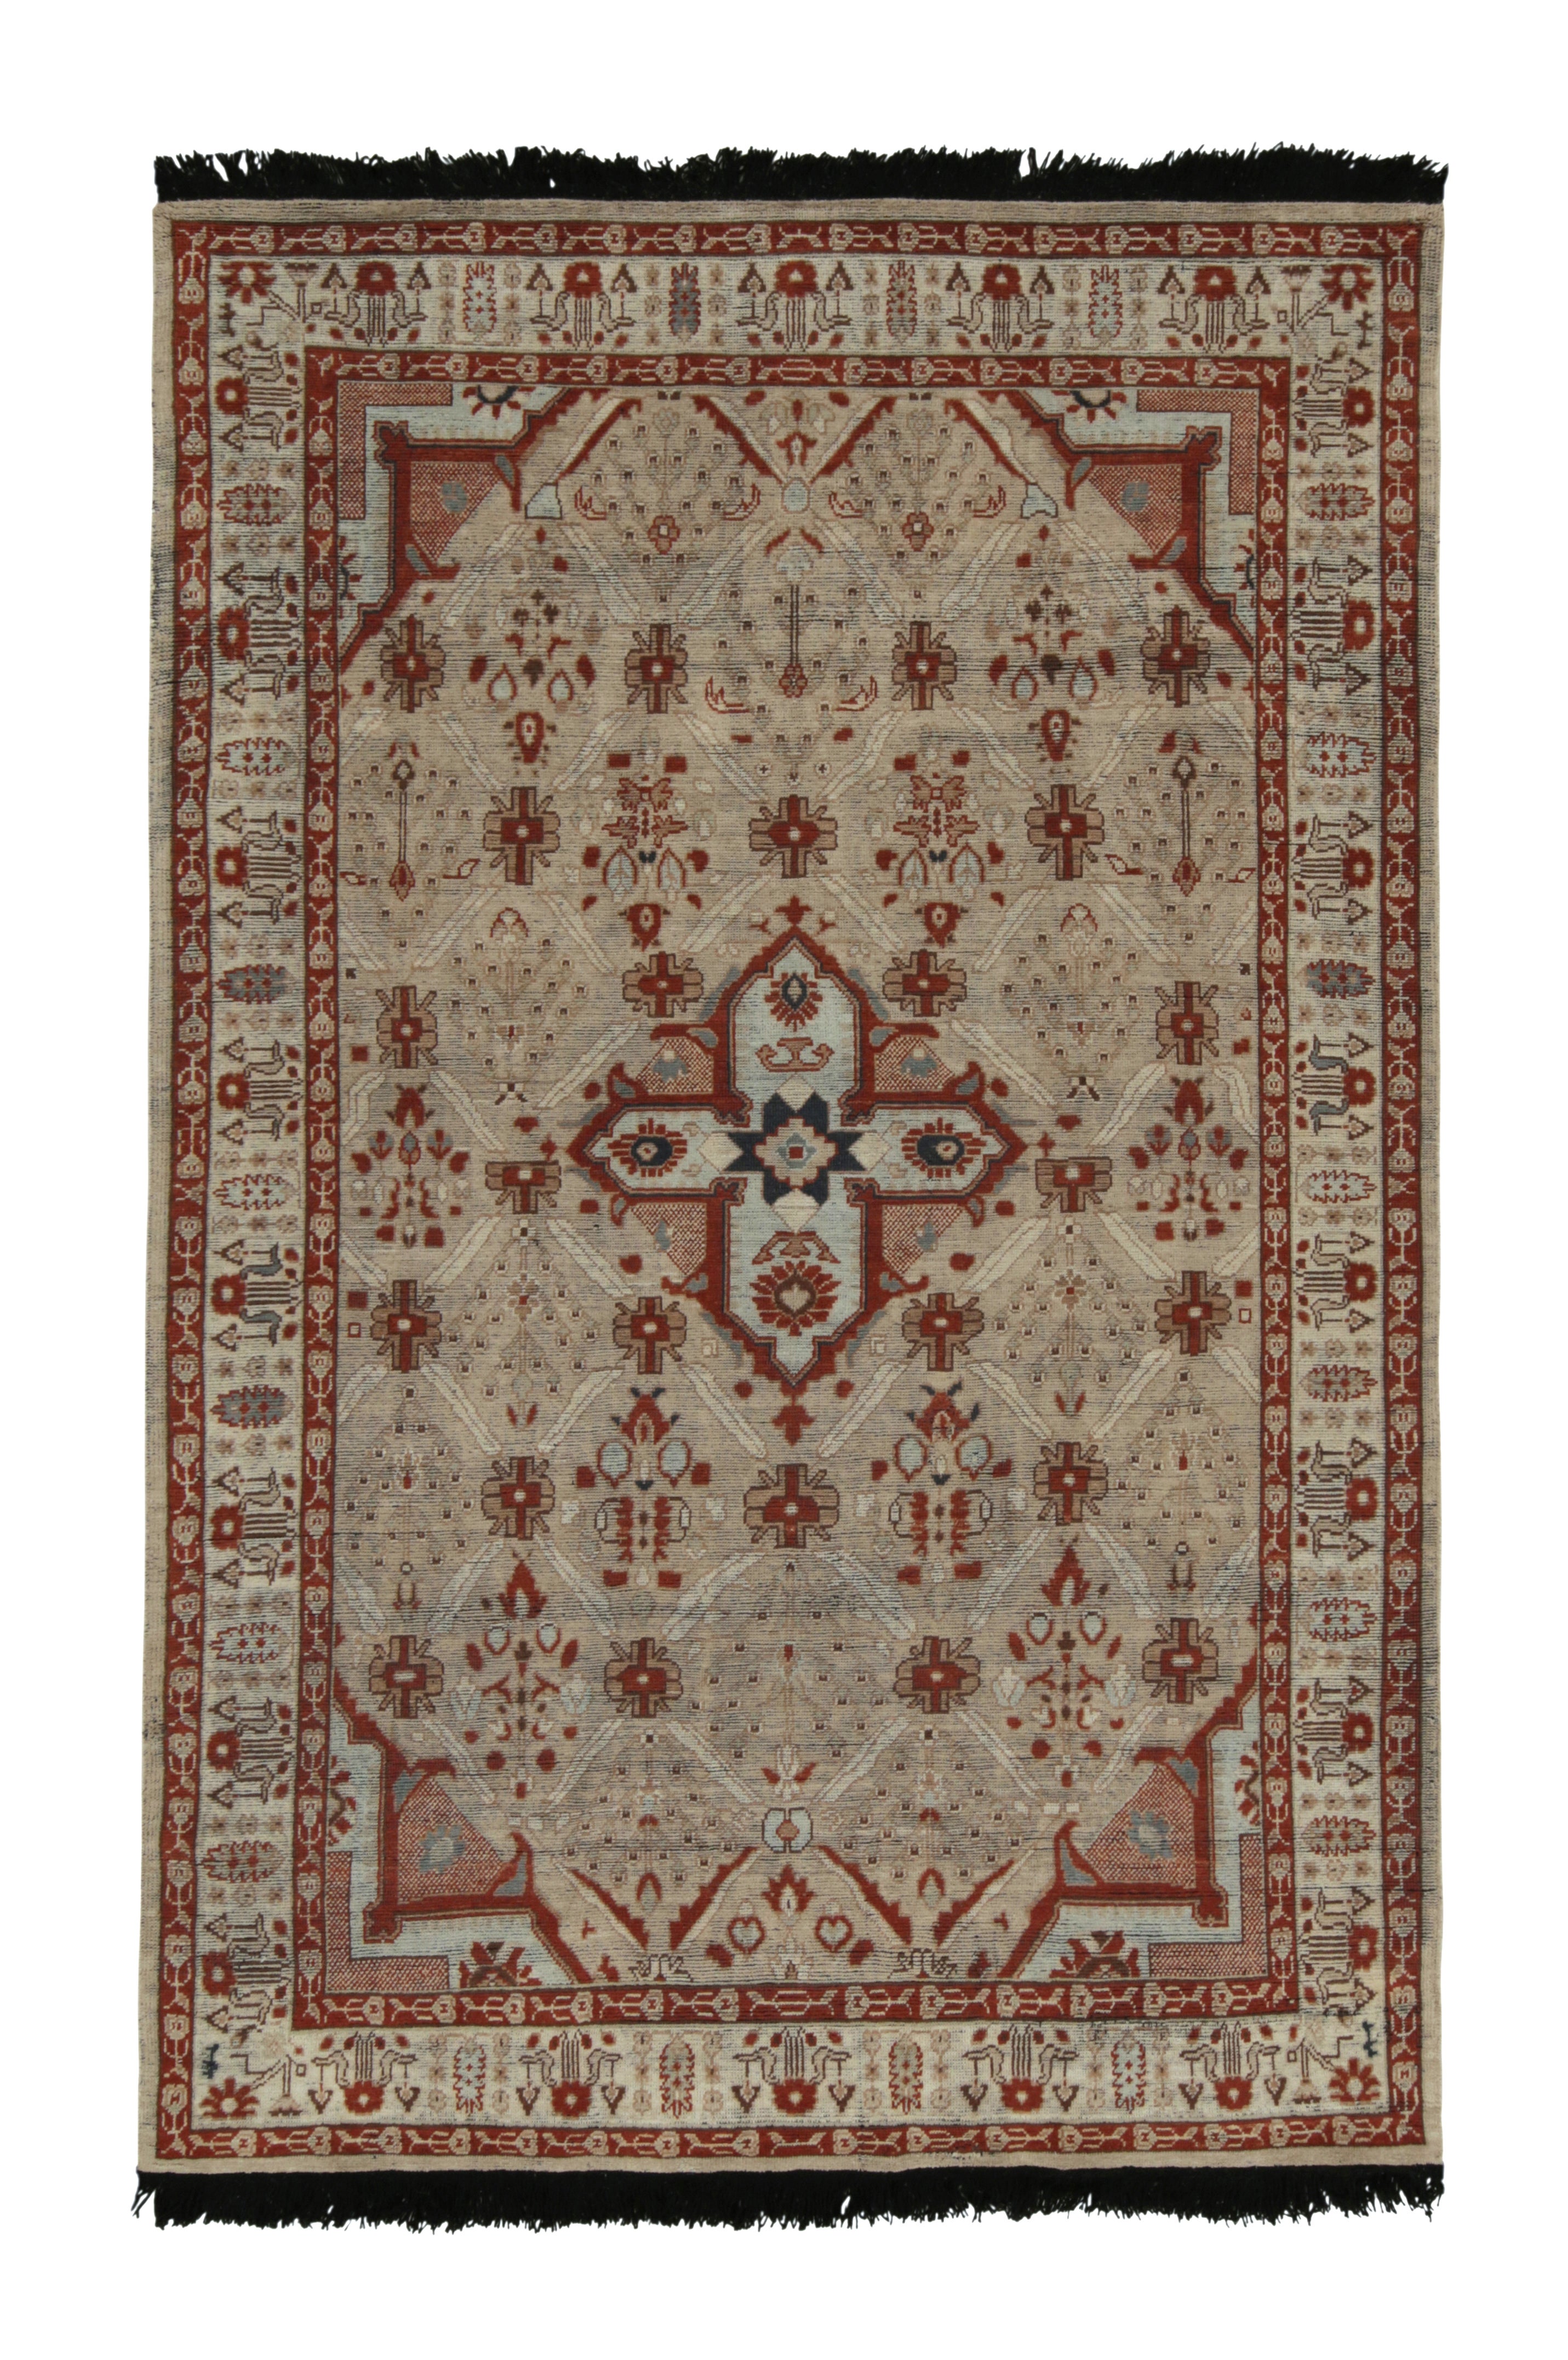 Rug & Kilim’s Tribal Style Rug in Gray, Red and Brown Geometric Patterns